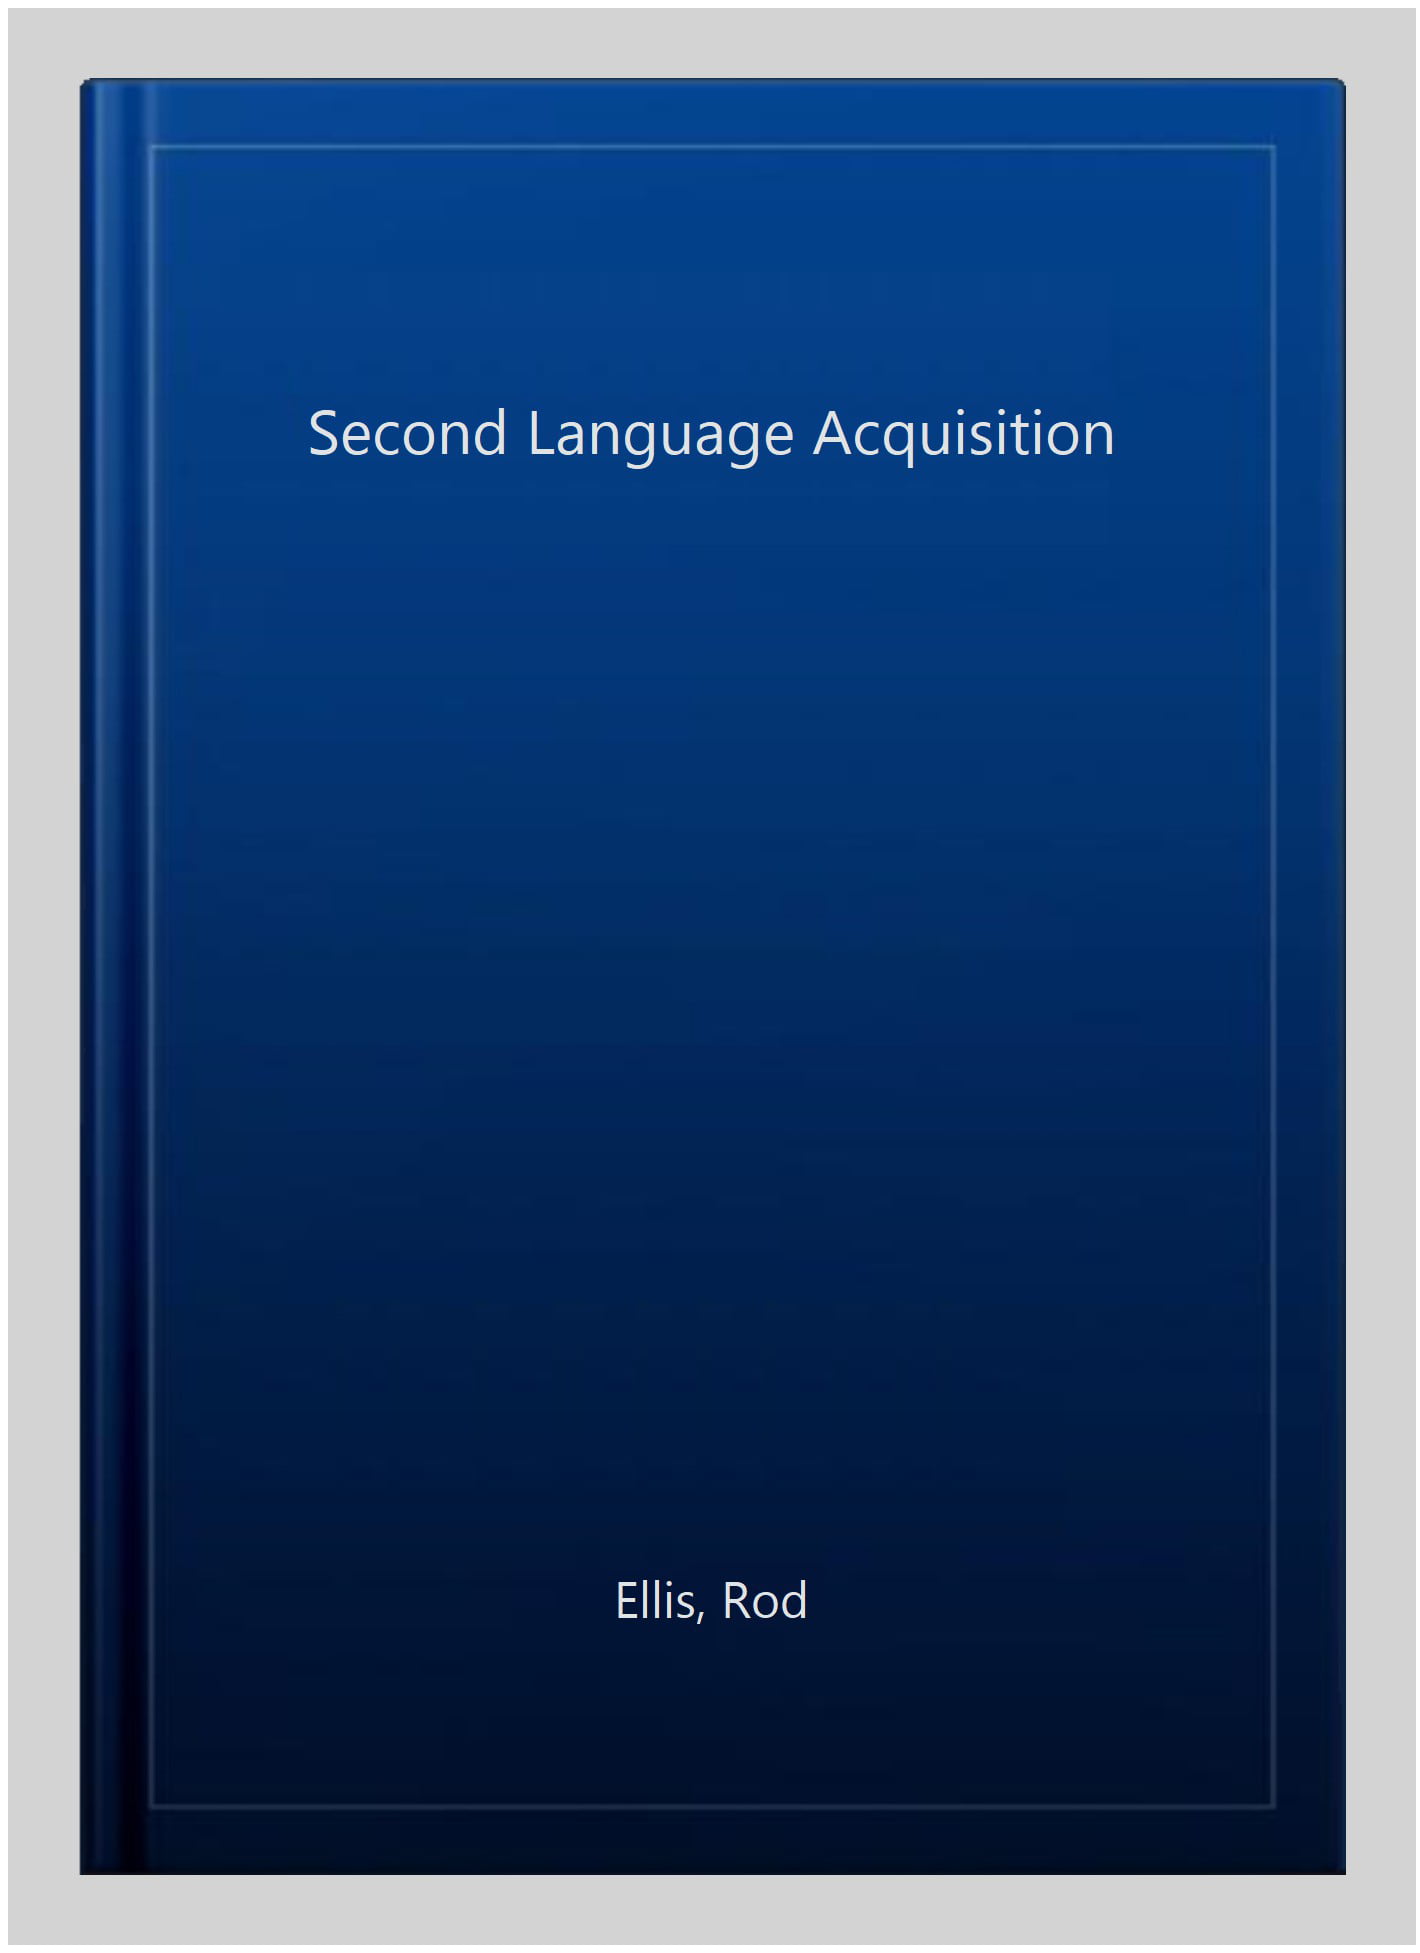 Pre-owned: Second Language Acquisition, Paperback by Ellis, Rod, ISBN  019437212X, ISBN-13 9780194372121